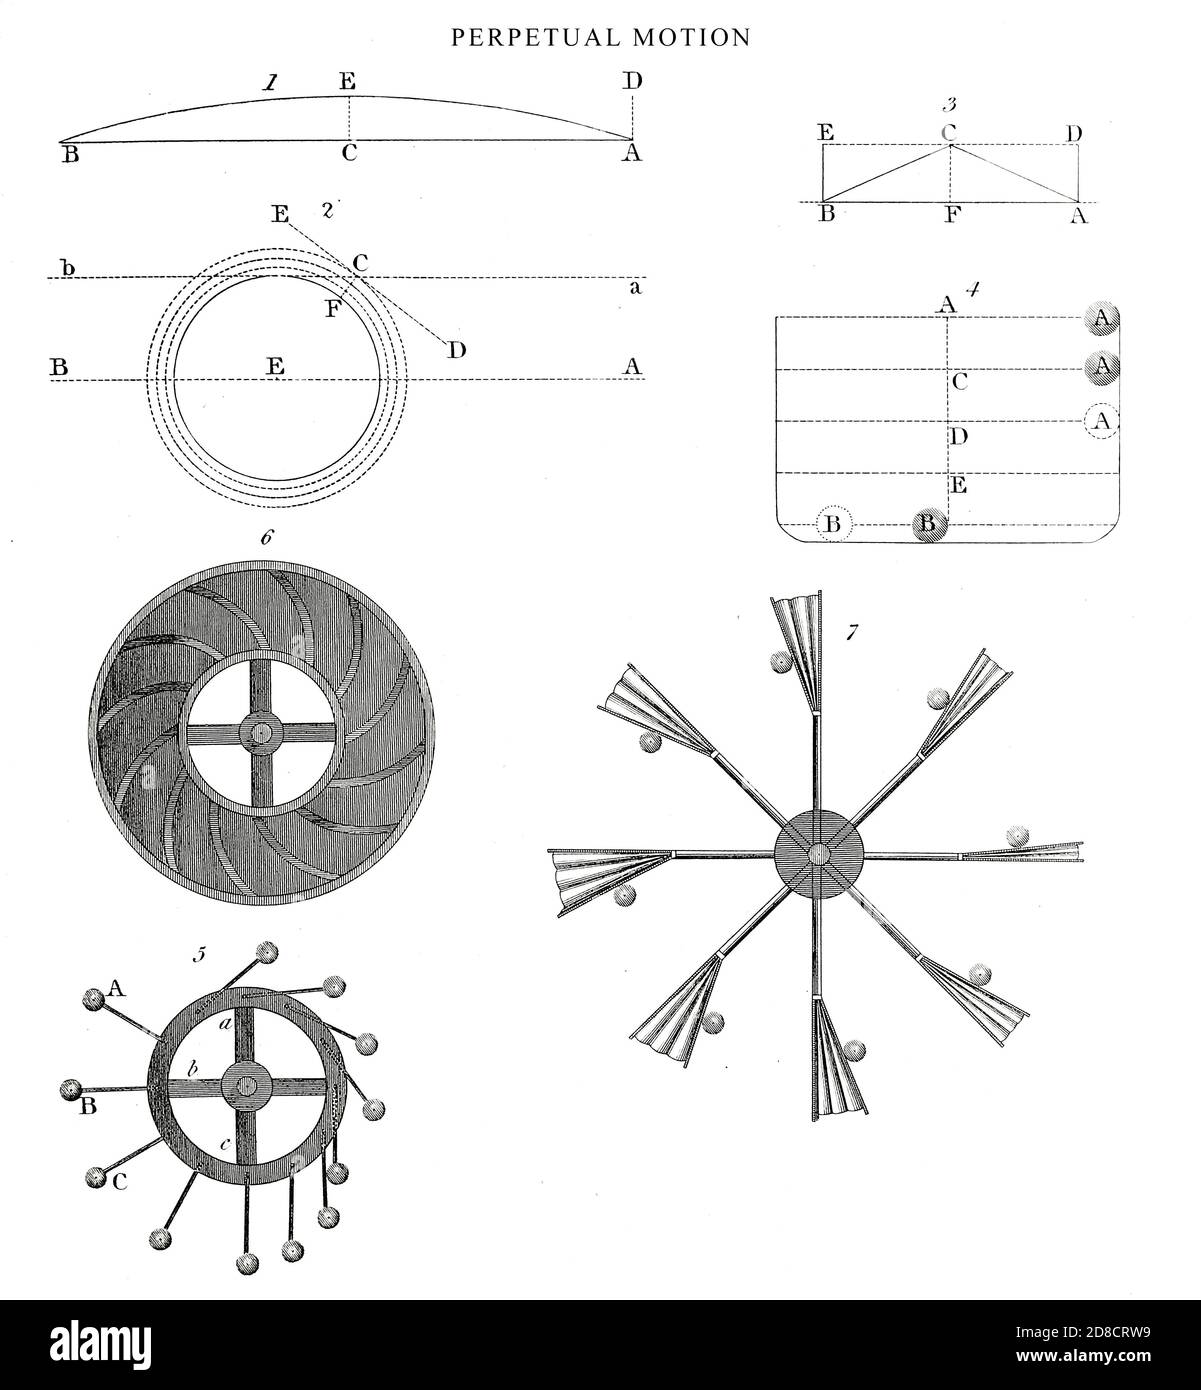 Perpetual motion is the motion of bodies that continues forever. A perpetual motion machine is a hypothetical machine that can do work infinitely without an energy source. This kind of machine is impossible, as it would violate the first or second law of thermodynamics. Copperplate engraving From the Encyclopaedia Londinensis or, Universal dictionary of arts, sciences, and literature; Volume XVI;  Edited by Wilkes, John. Published in London in 1819 Stock Photo